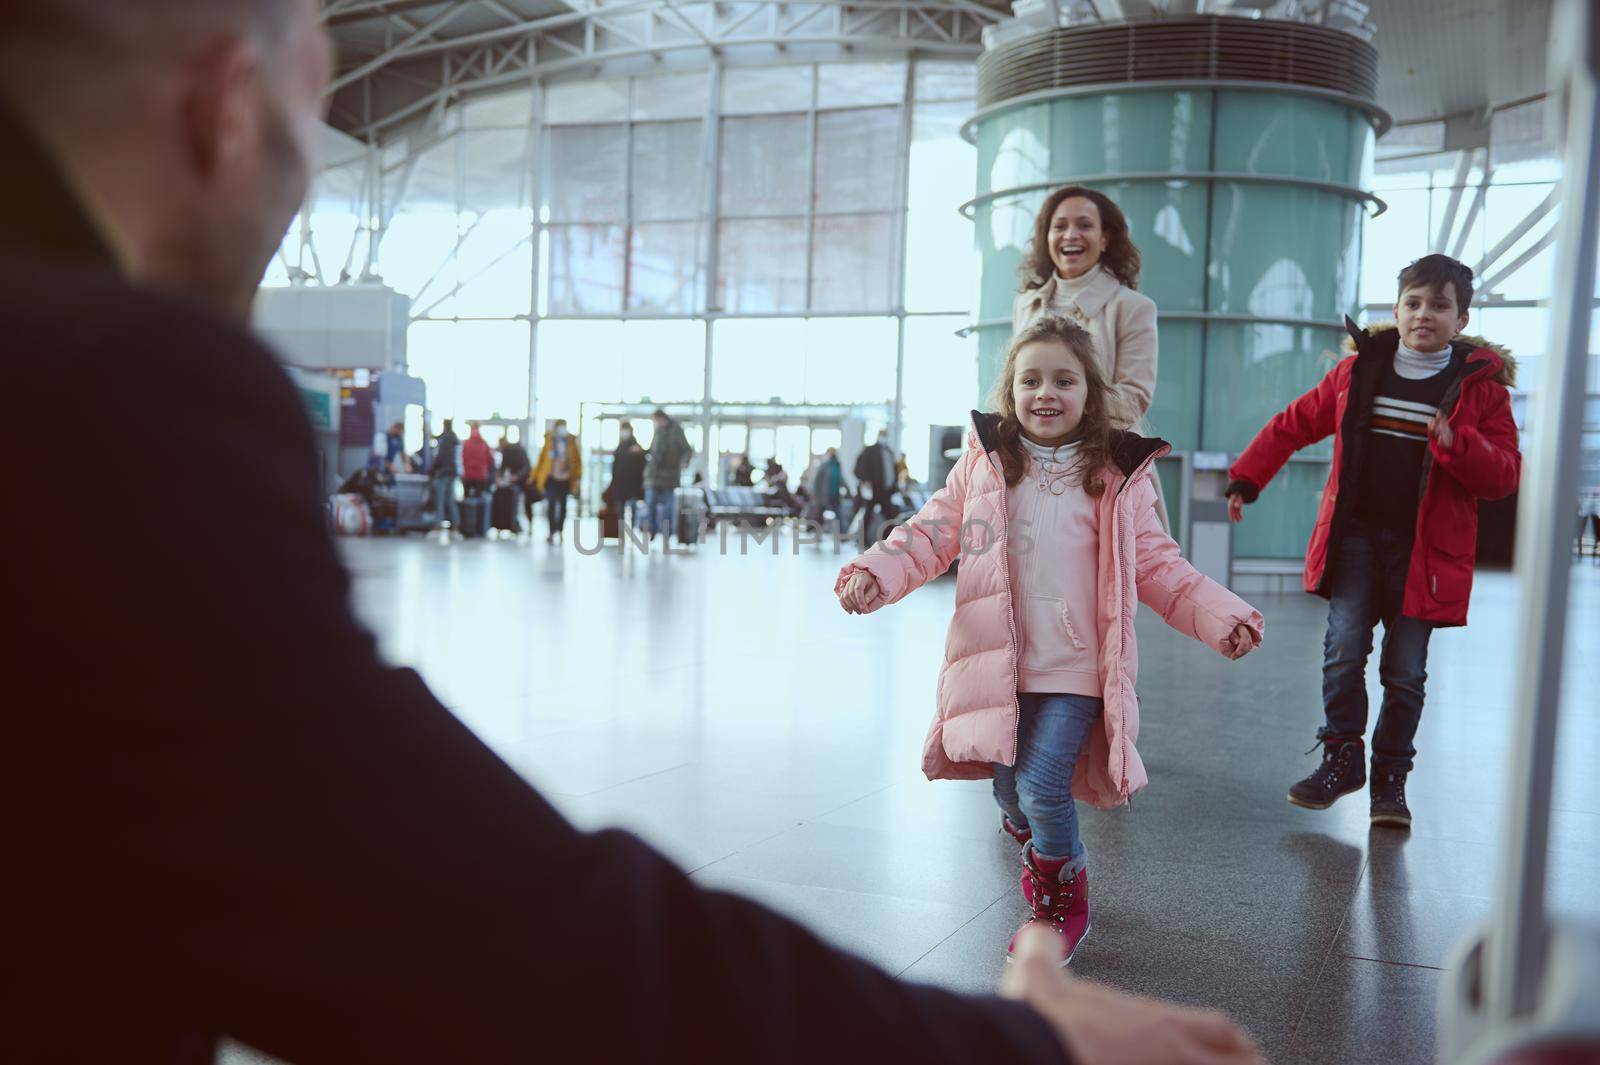 Happy excited woman with her kids running to her husband in the airport arrivals terminal waiting room, meeting him after his business trip. Long-awaited family reunion concept